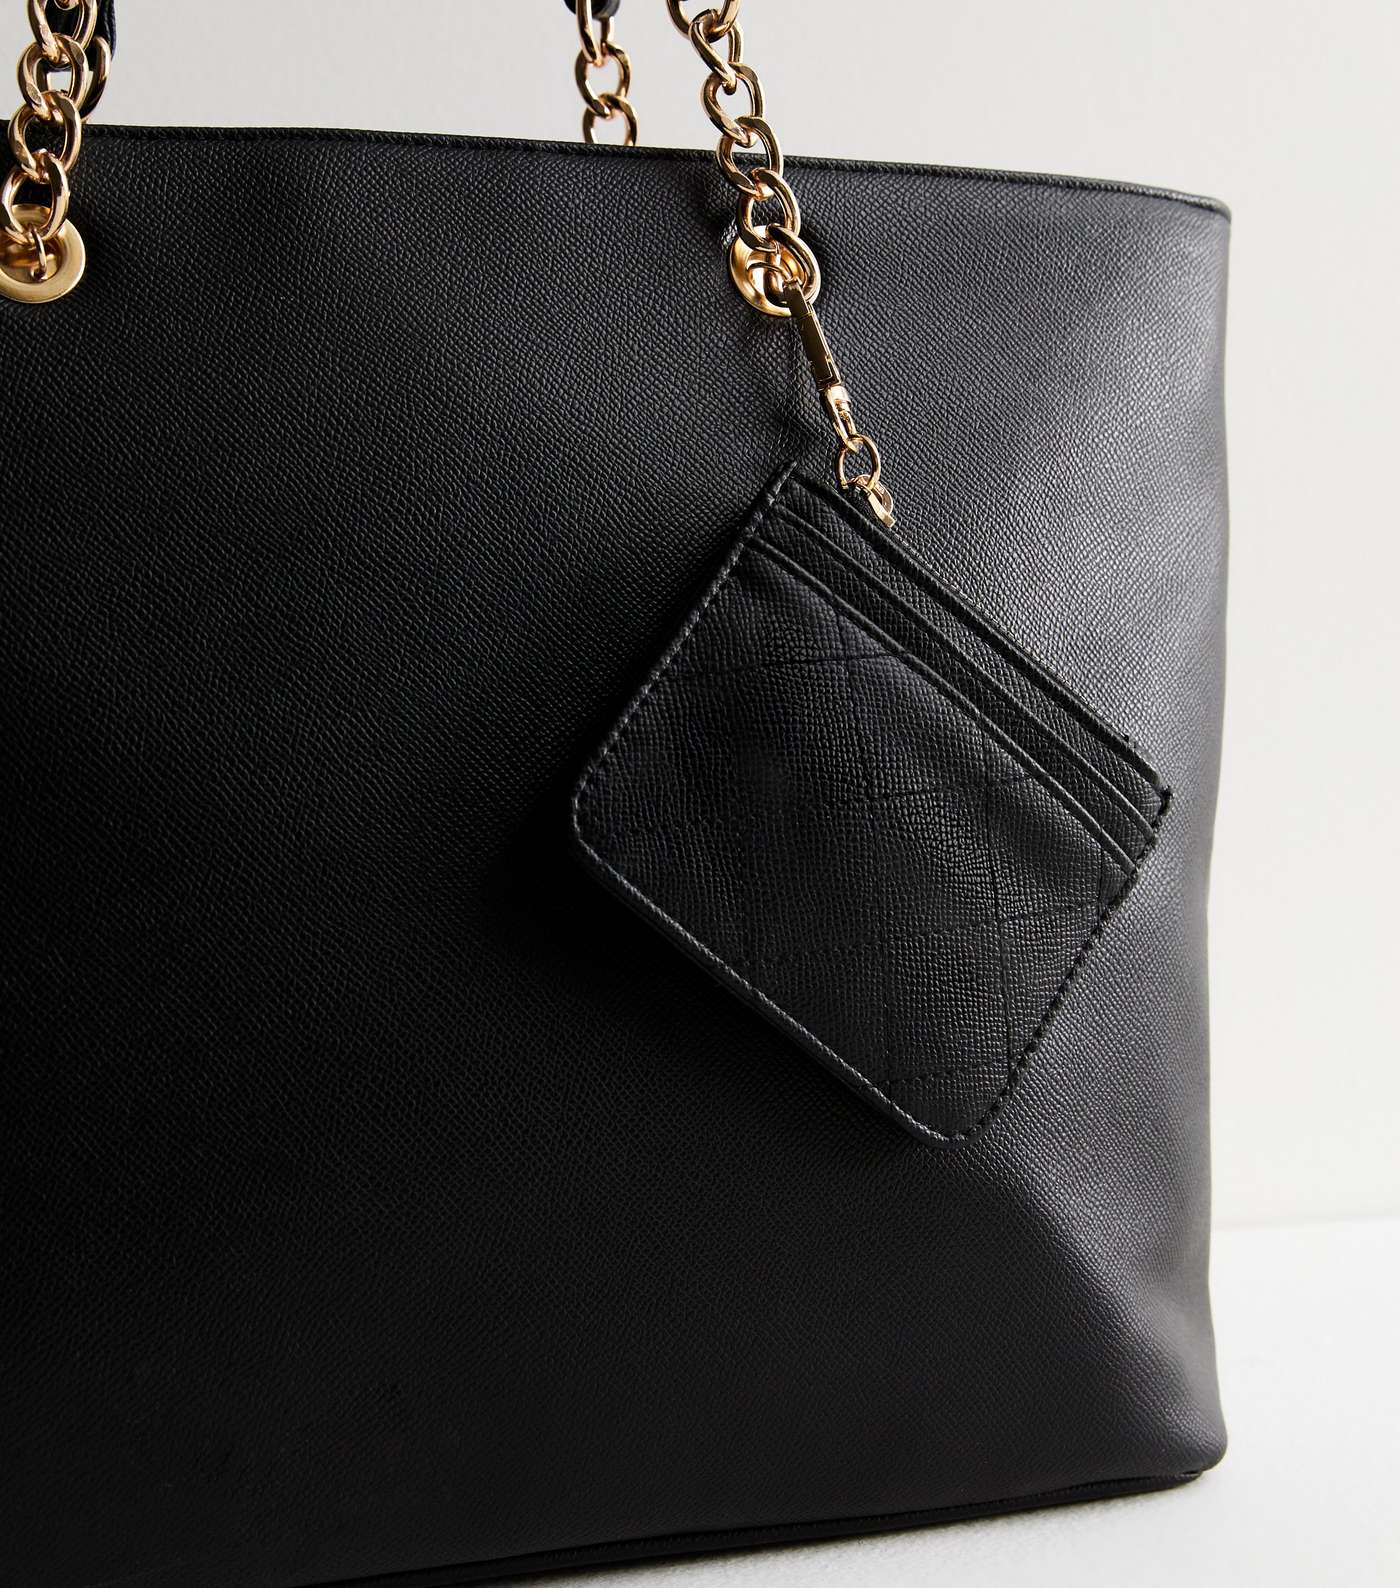 Black Leather-Look Tote Bag and Card Holder Image 3